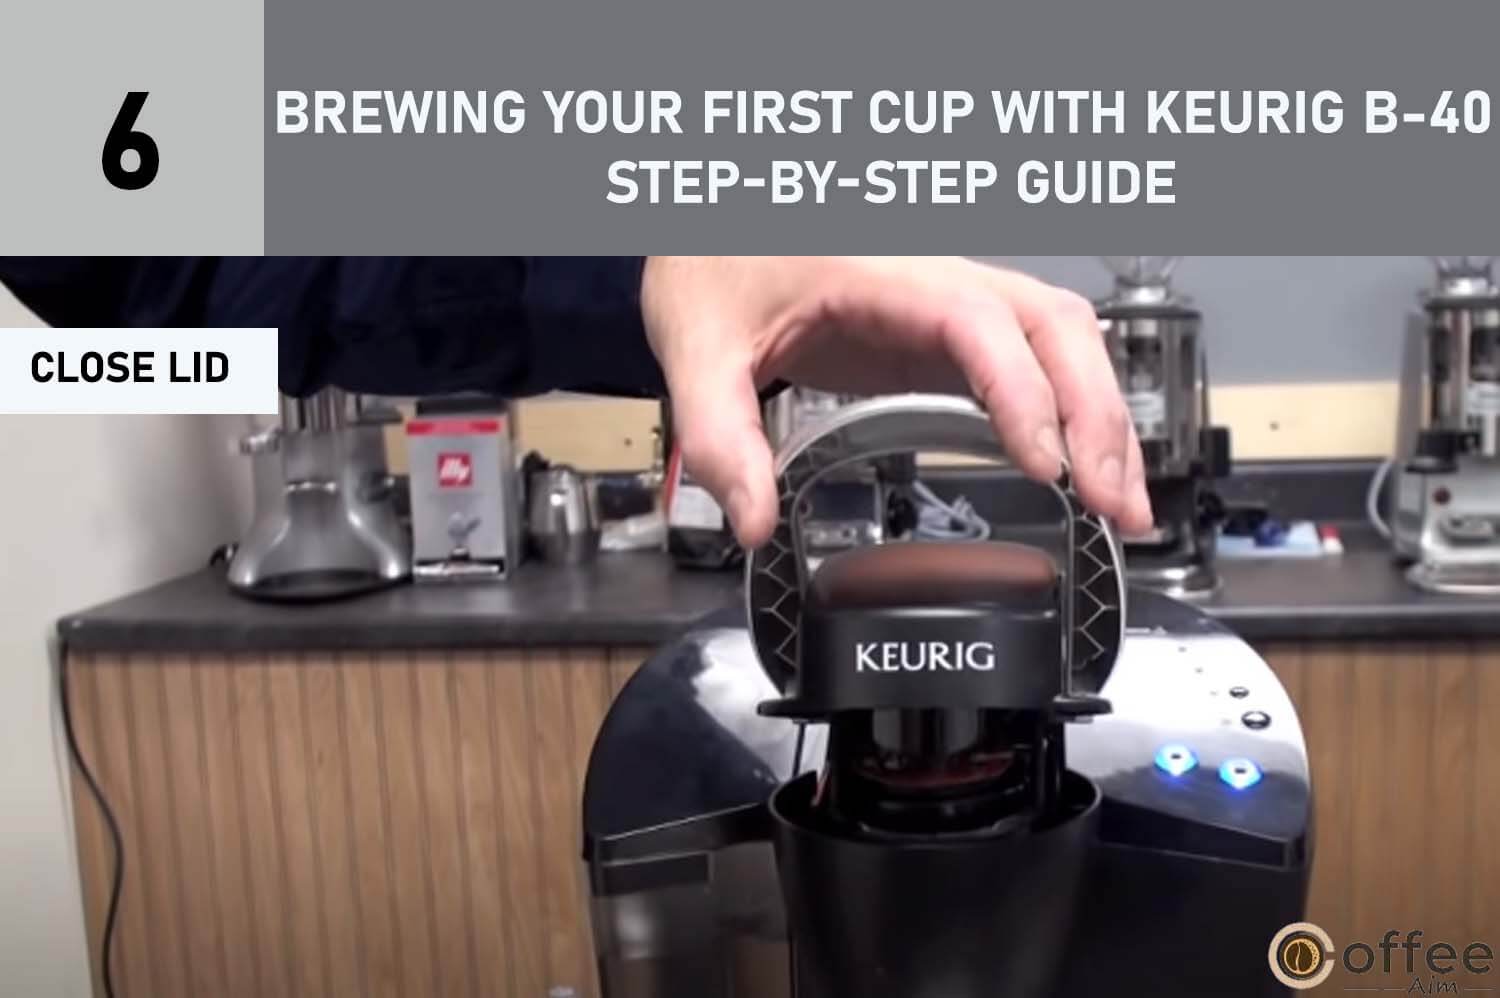 The depicted illustration illustrates the action of "Closing the Lid" as an integral step under the comprehensive guide titled "Brewing Your First Cup with Keurig B-40 - Step-by-Step Guide" for the informative article on "How to Utilize the Keurig B-40"